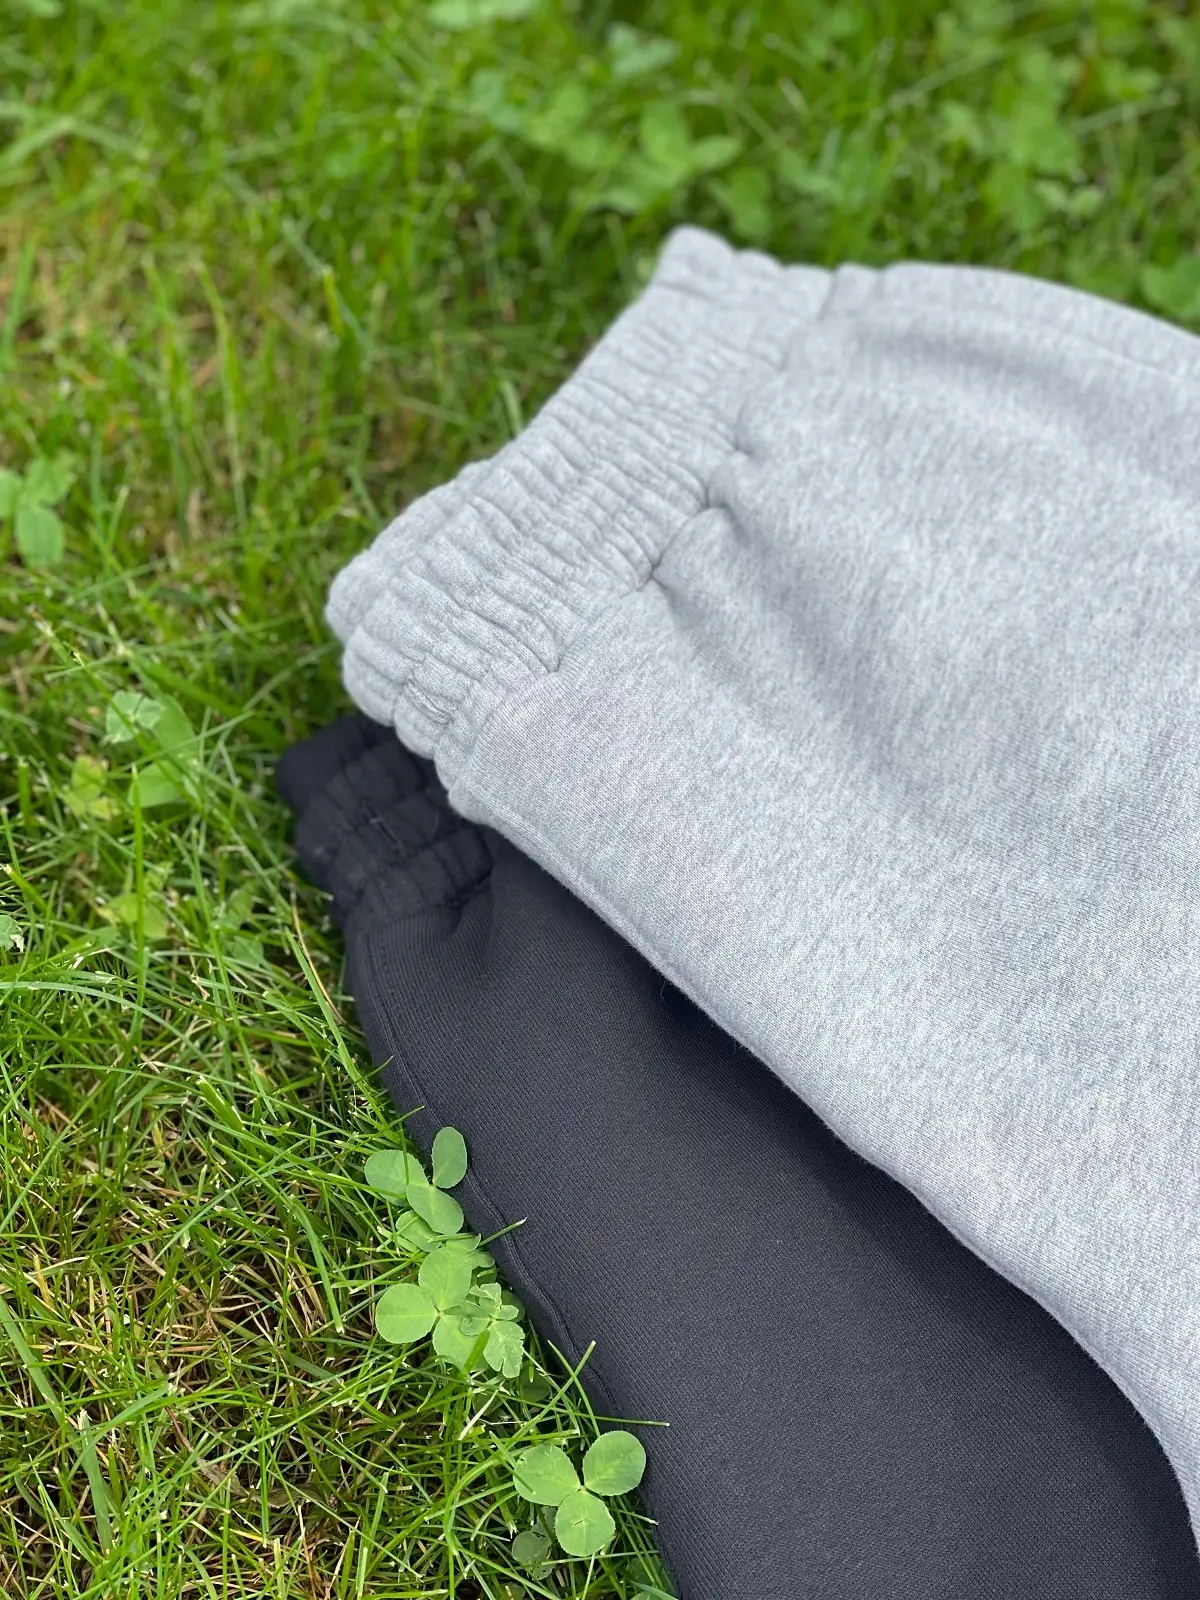 10 Must-Have Camping Essentials for Outdoor Adventures-Sweatpants-Joggers